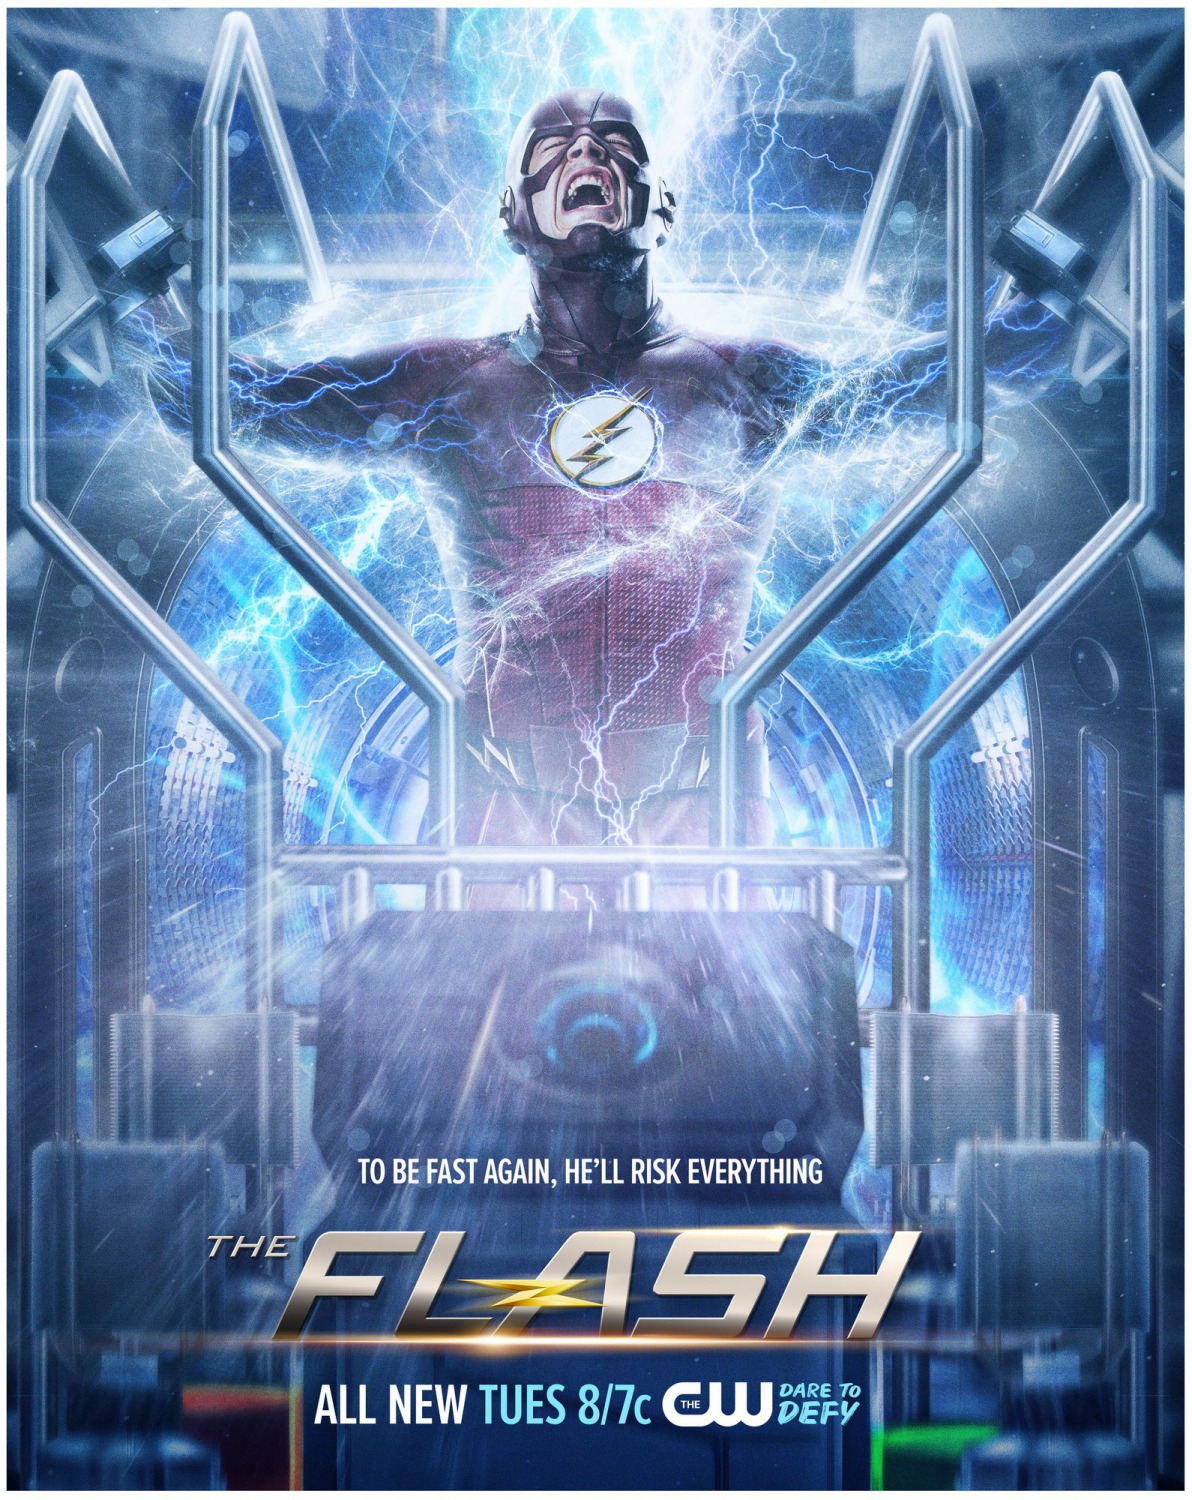 Extra Large Movie Poster Image for The Flash (#13 of 65)